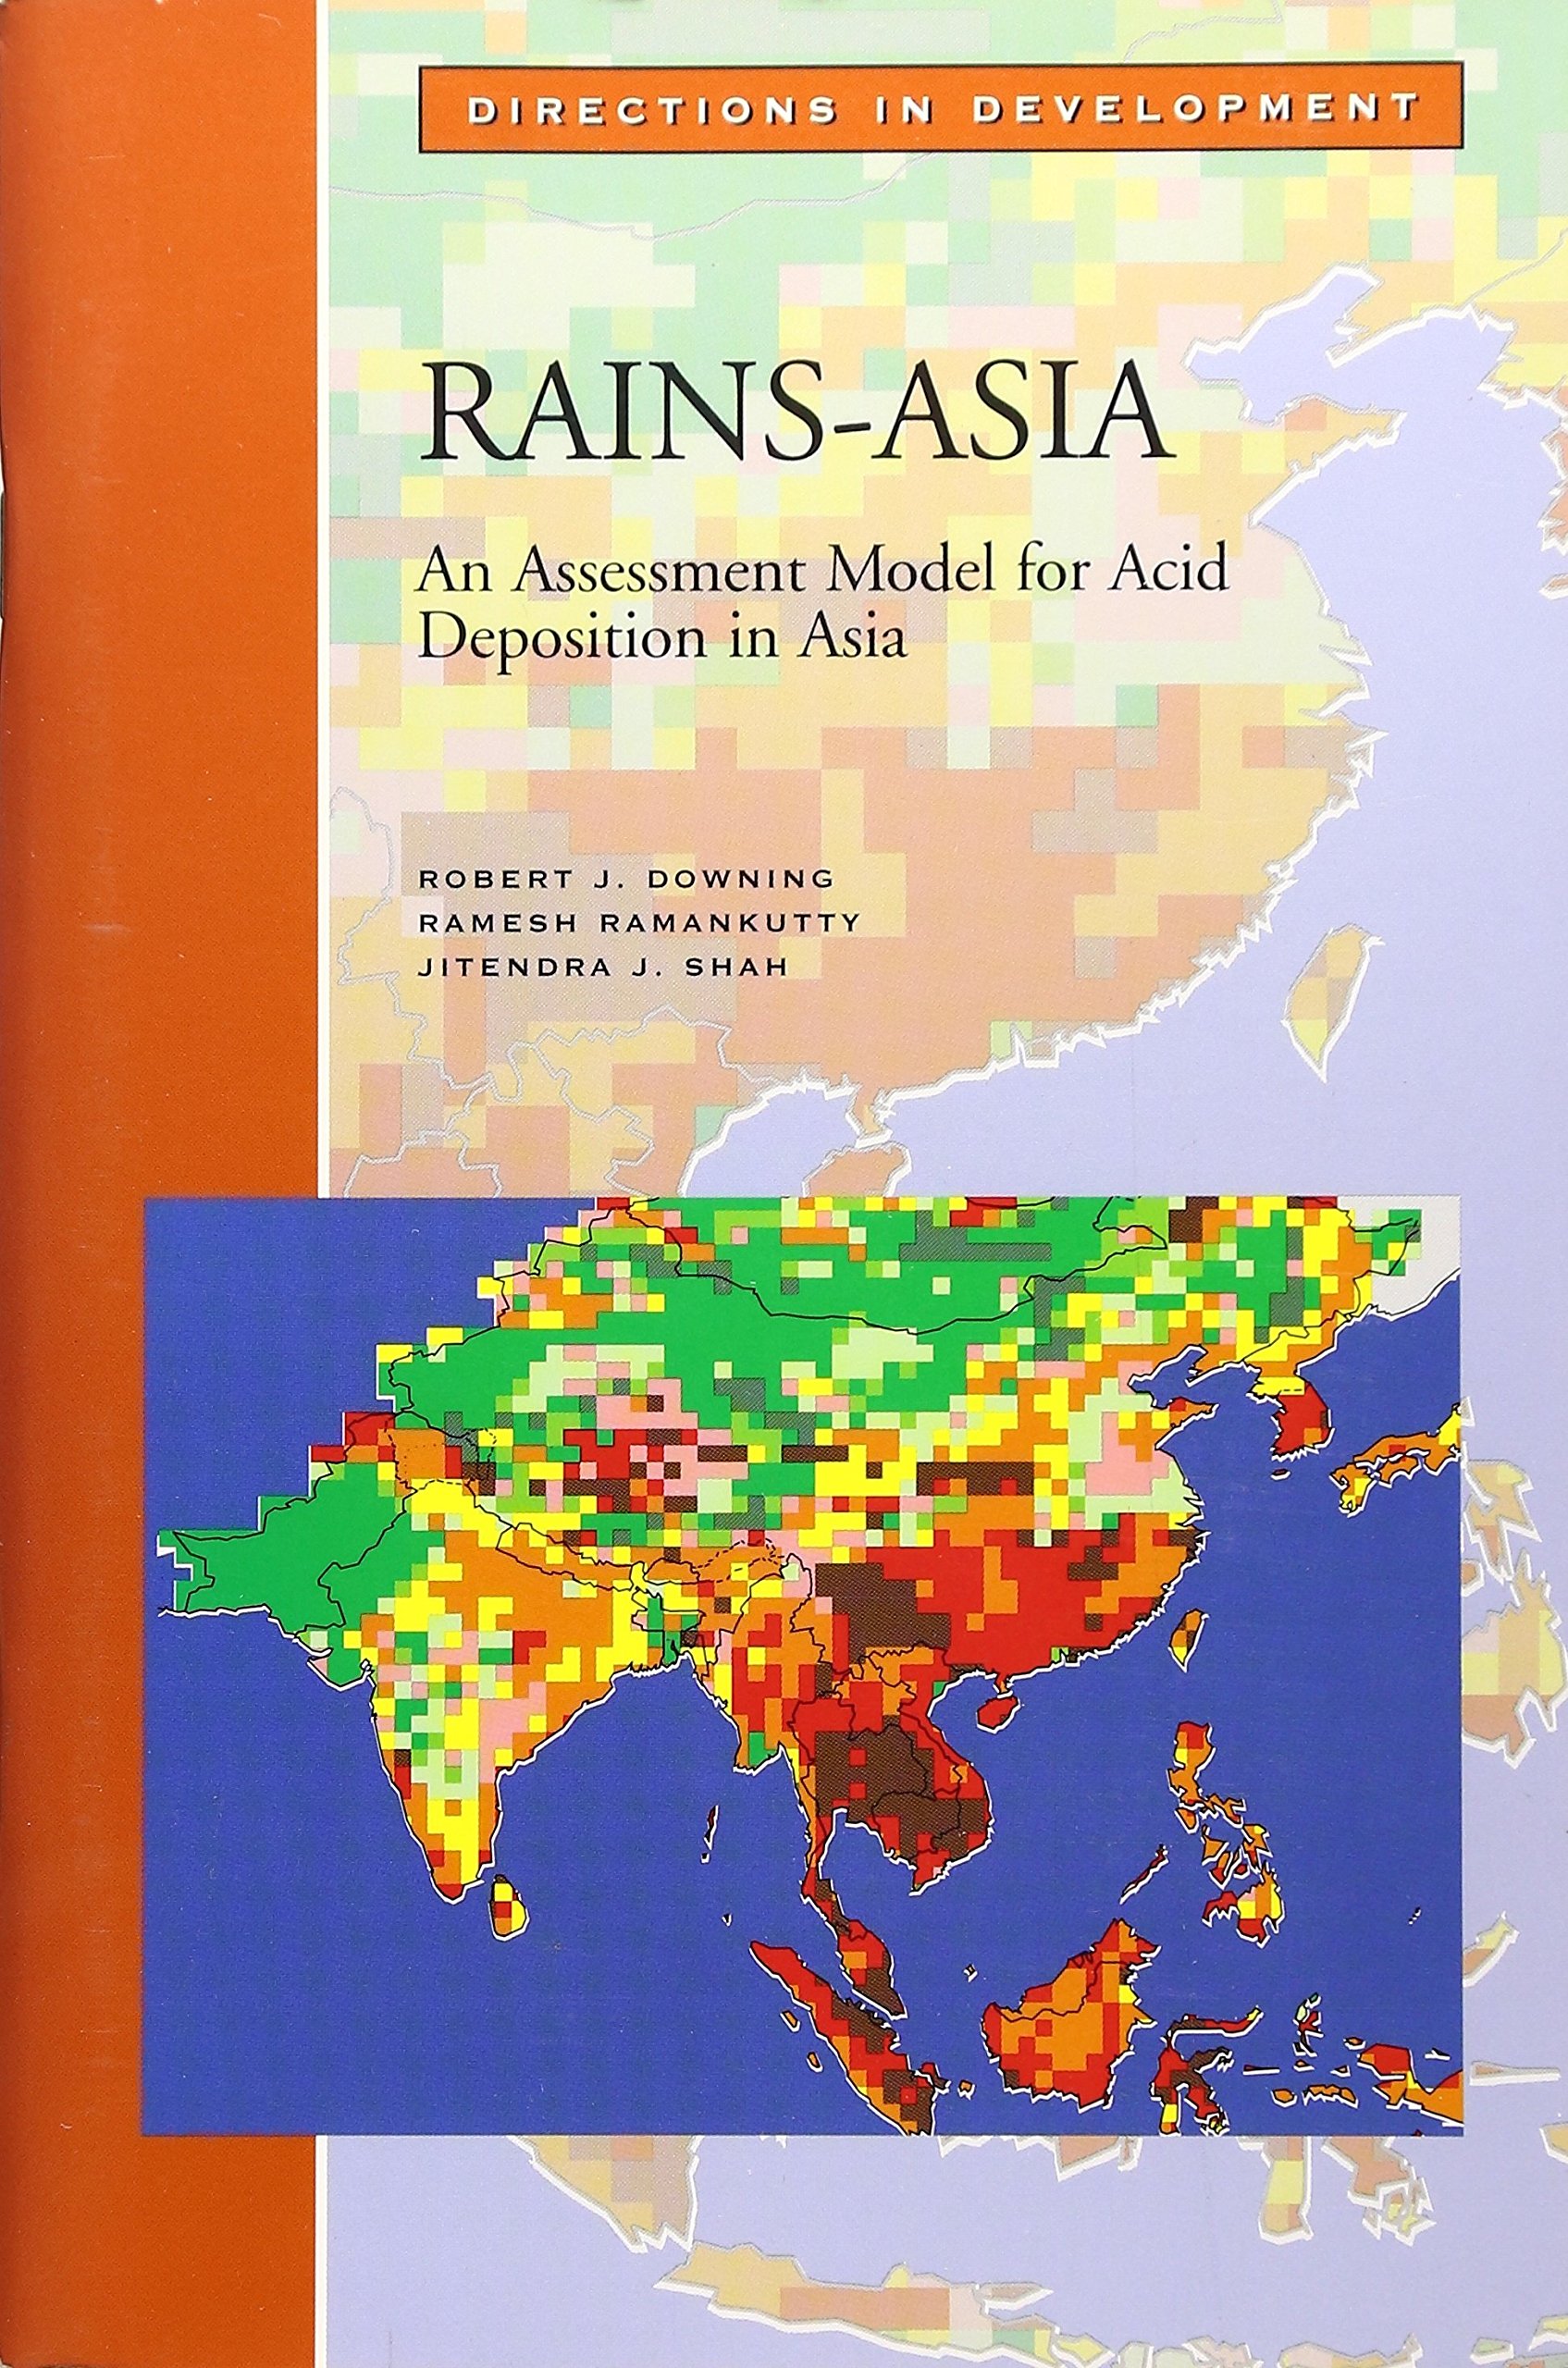 RAINS model extended to analyse sulfur dioxide emissions in Asia